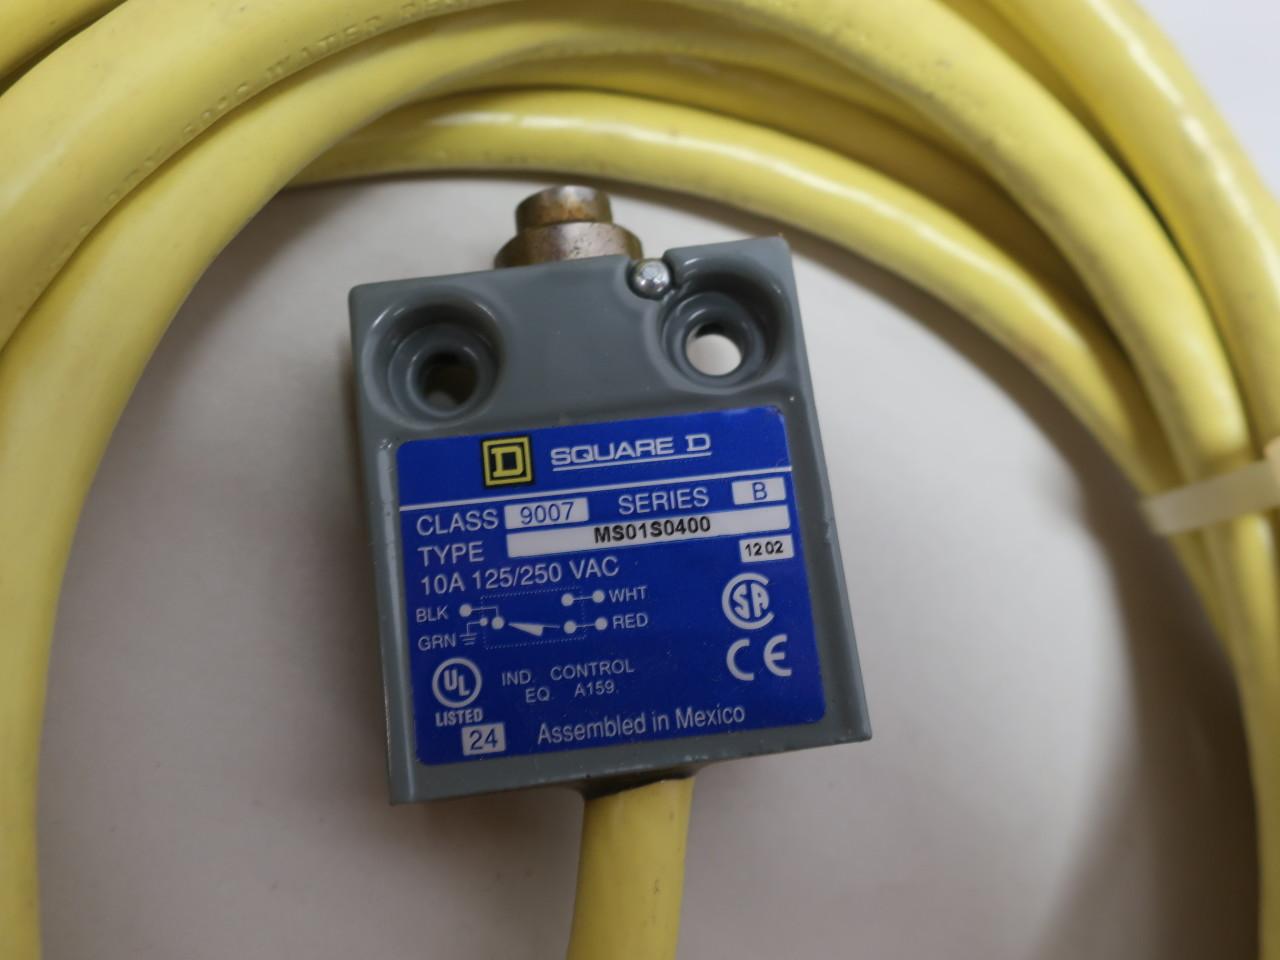 SQUARE D COMPACT ENCLOSED LIMIT SWITCH 9007MS02S0300 SERIES B 